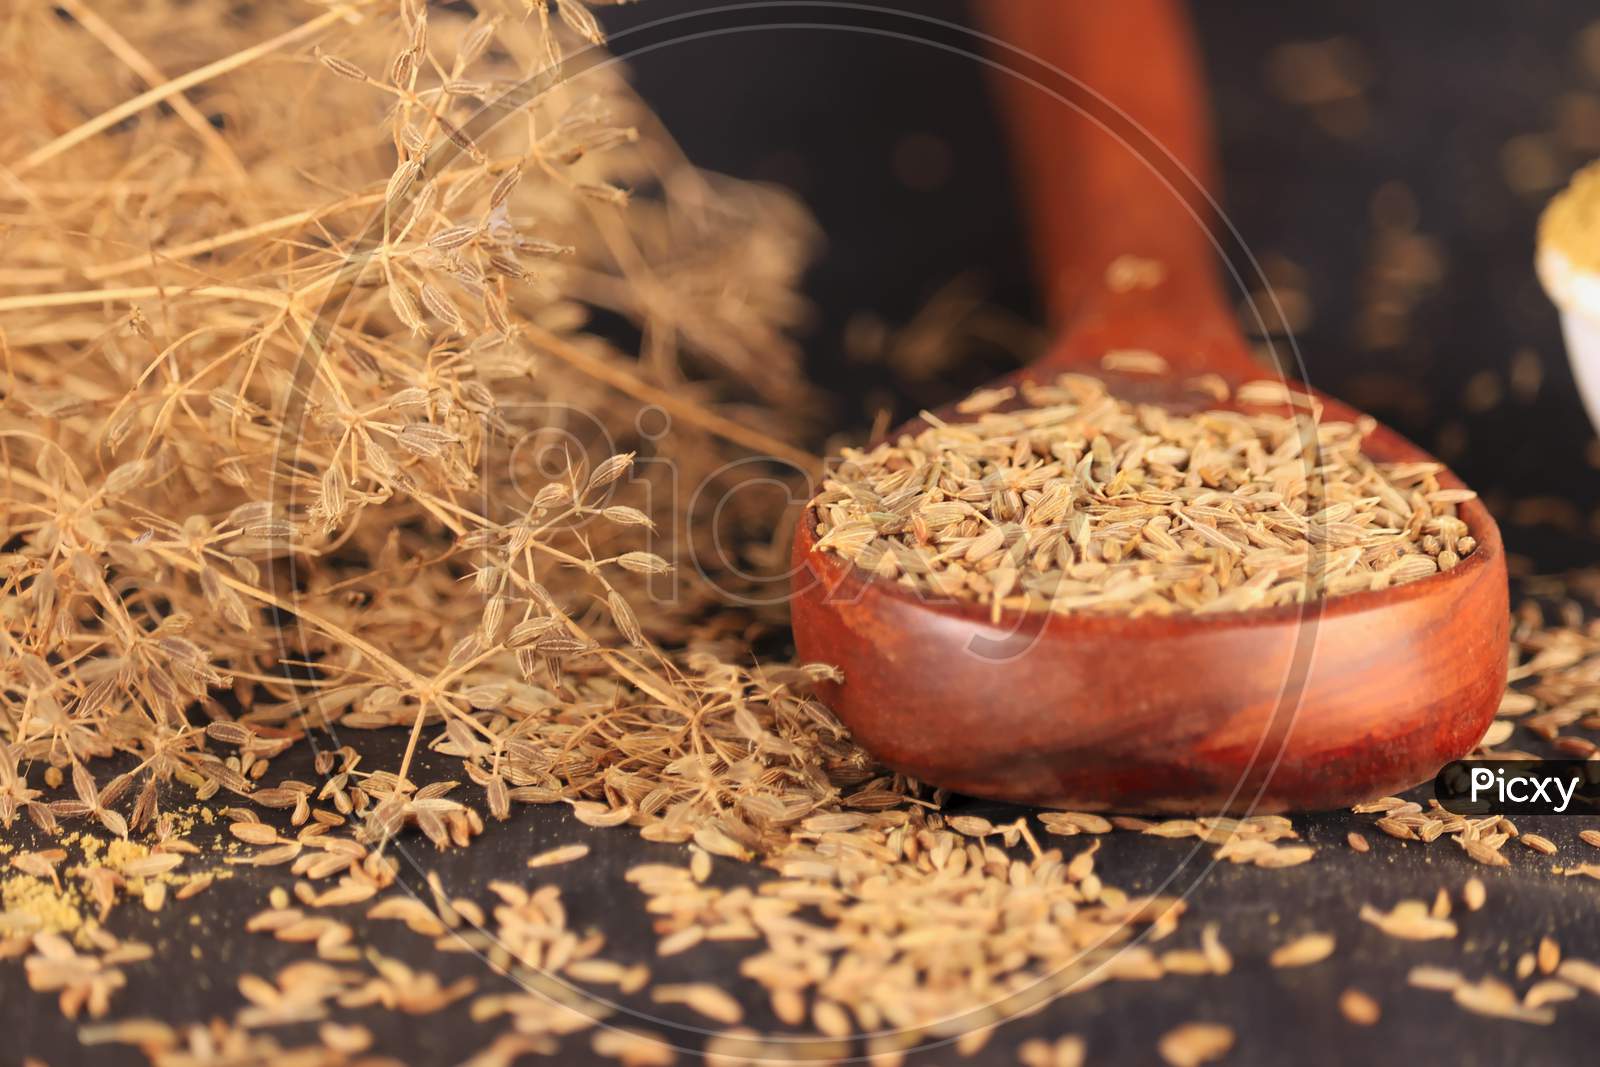 Caraway Plant With Carvi Or Cumin Seeds On Wooden Table With Black Background, Indian Popular Spice Zira Or Jeera,